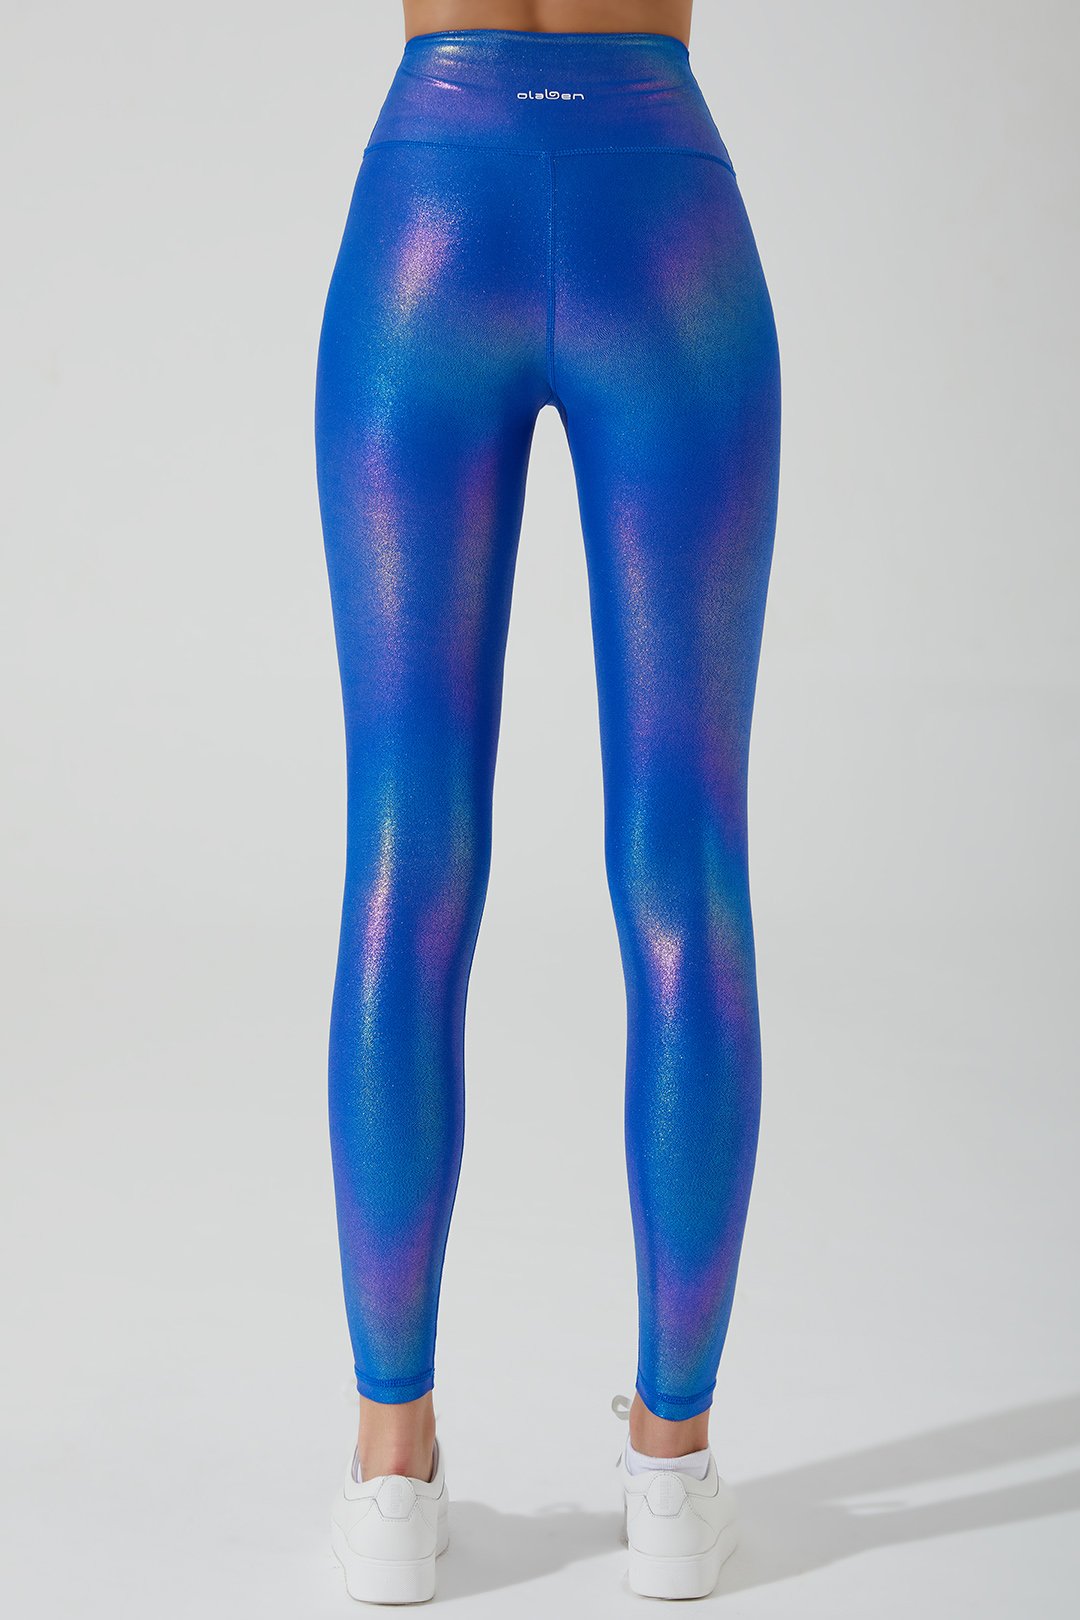 Stylish women's magnetic blue leggings with an iridescent finish, perfect for a trendy look.